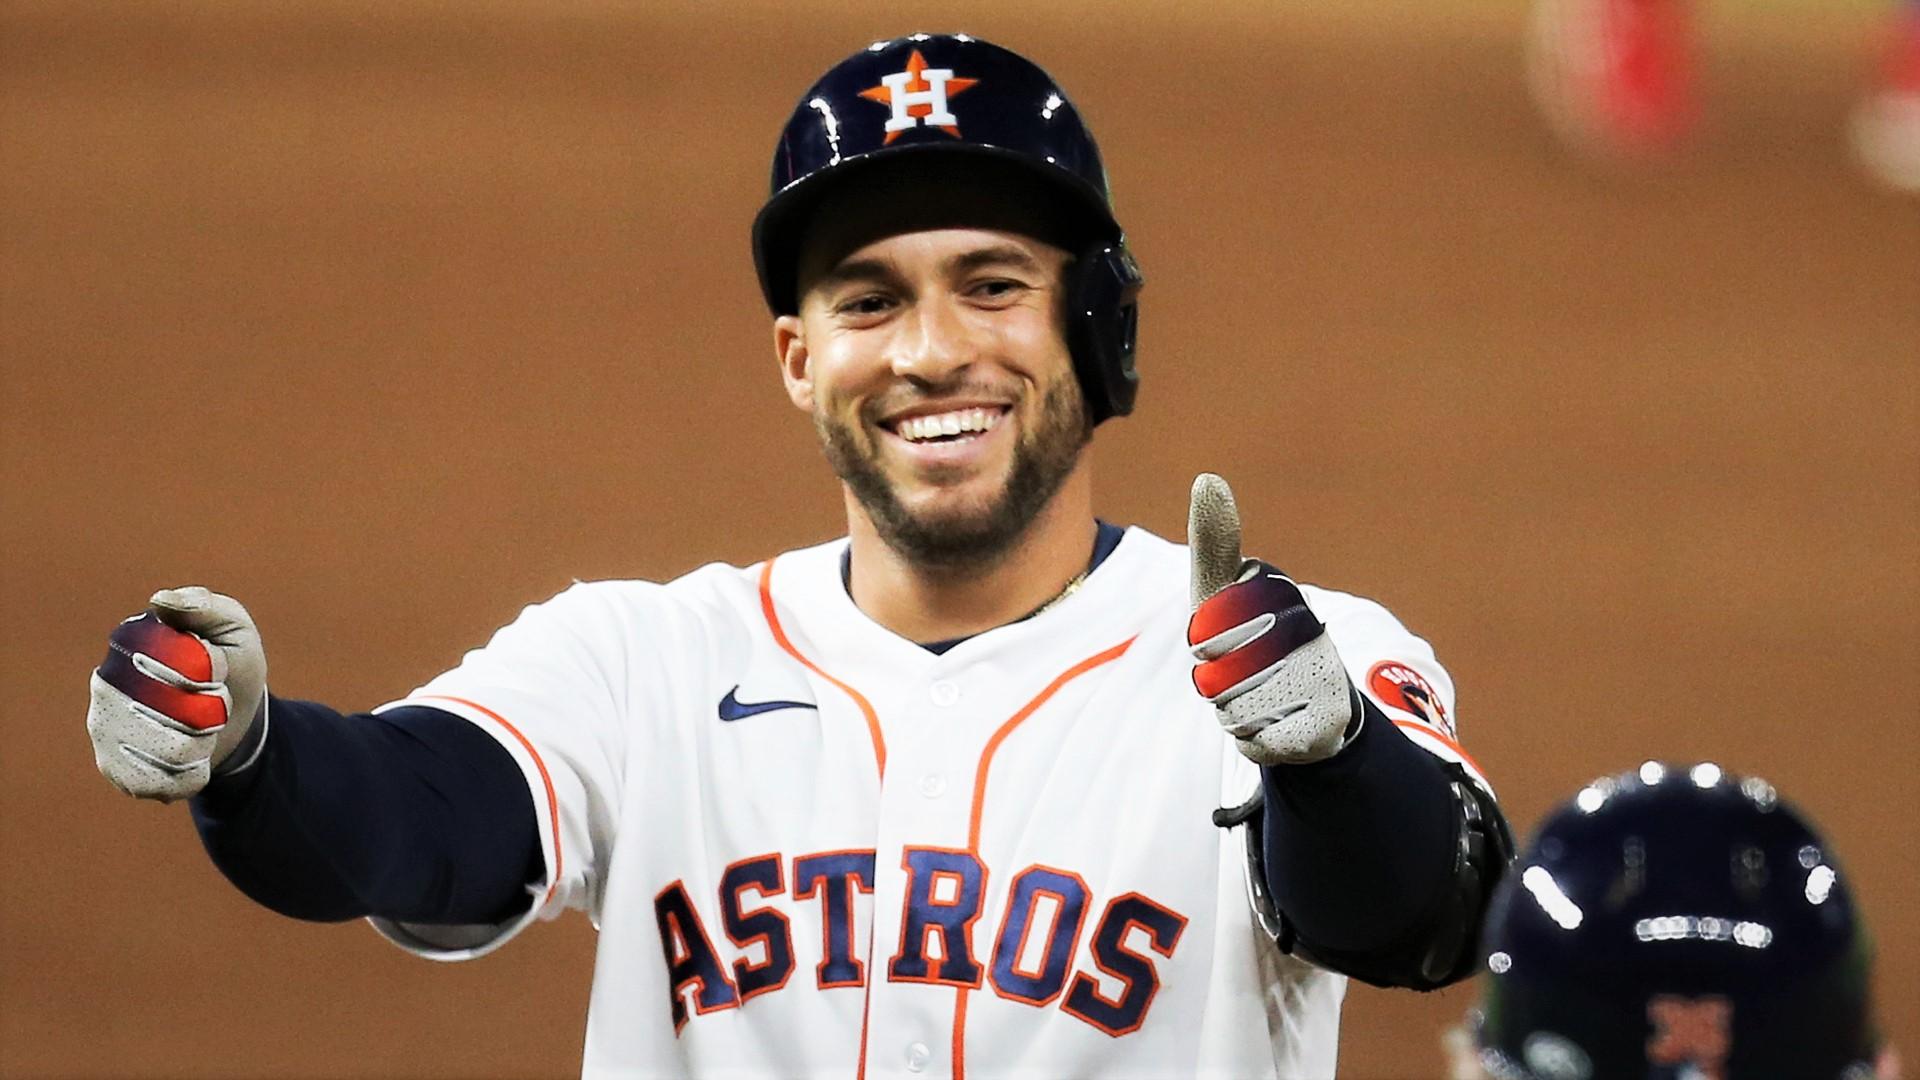 Sep 17, 2020; Houston, Texas, USA; Houston Astros center fielder George Springer (4) reacts after hitting a single against there Texas Rangers in the eighth inning at Minute Maid Park. Mandatory Credit: Thomas Shea-USA TODAY Sports / Sep 17, 2020; Houston, Texas, USA; Houston Astros center fielder George Springer (4) reacts after hitting a single against there Texas Rangers in the eighth inning at Minute Maid Park. Mandatory Credit: Thomas Shea-USA TODAY Sports